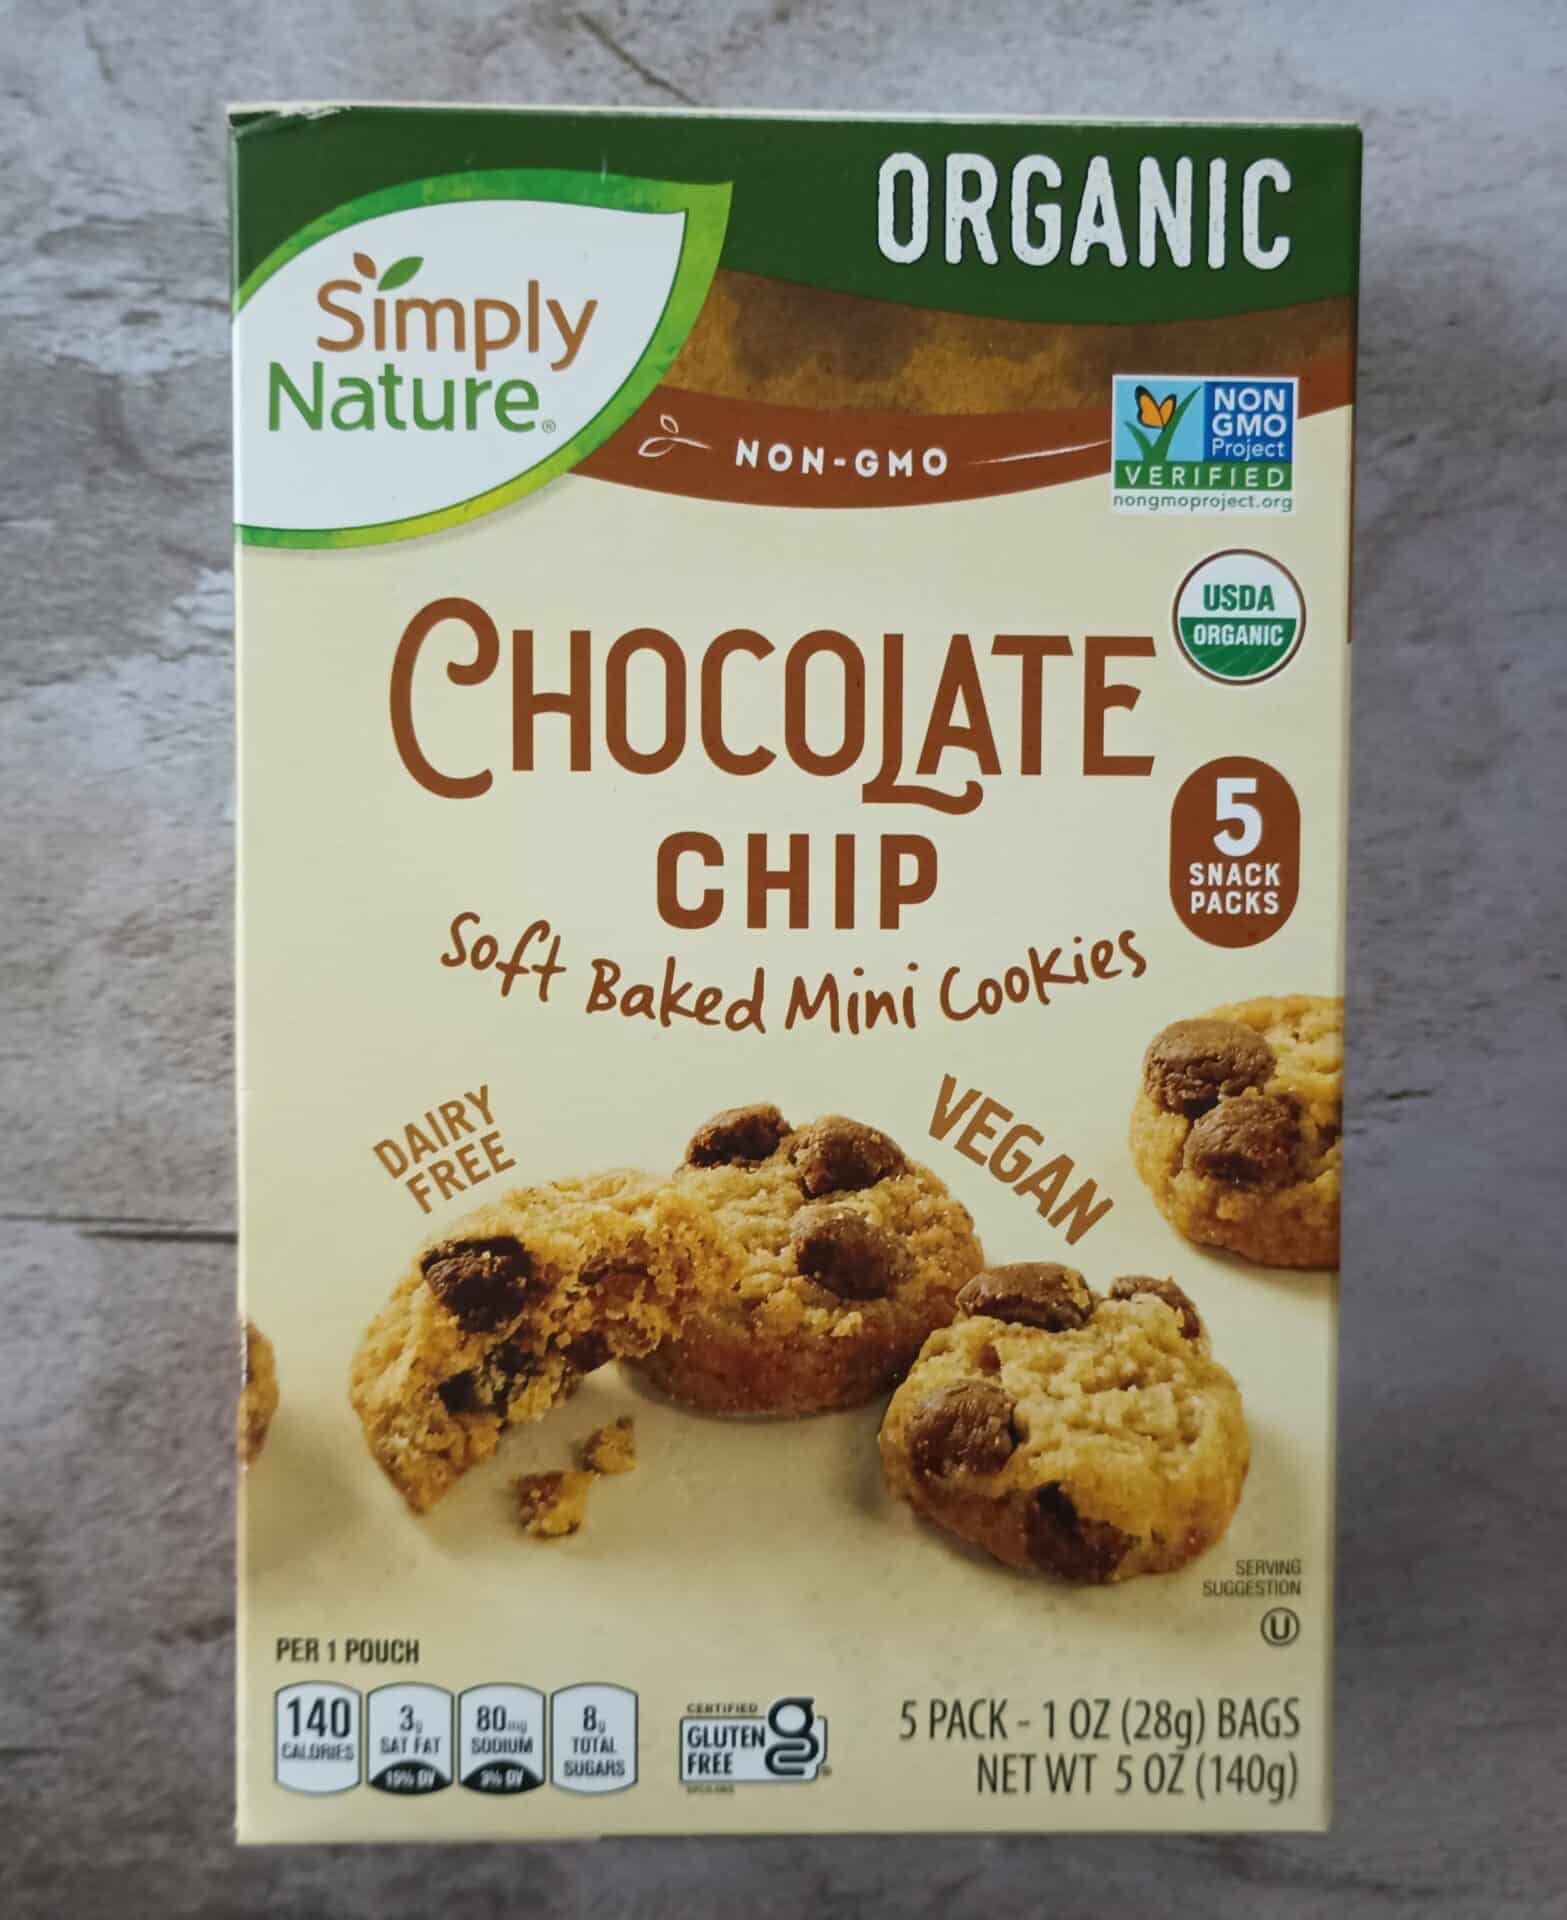 Simply Nature Chocolate Chip Soft Mini Baked Cookies